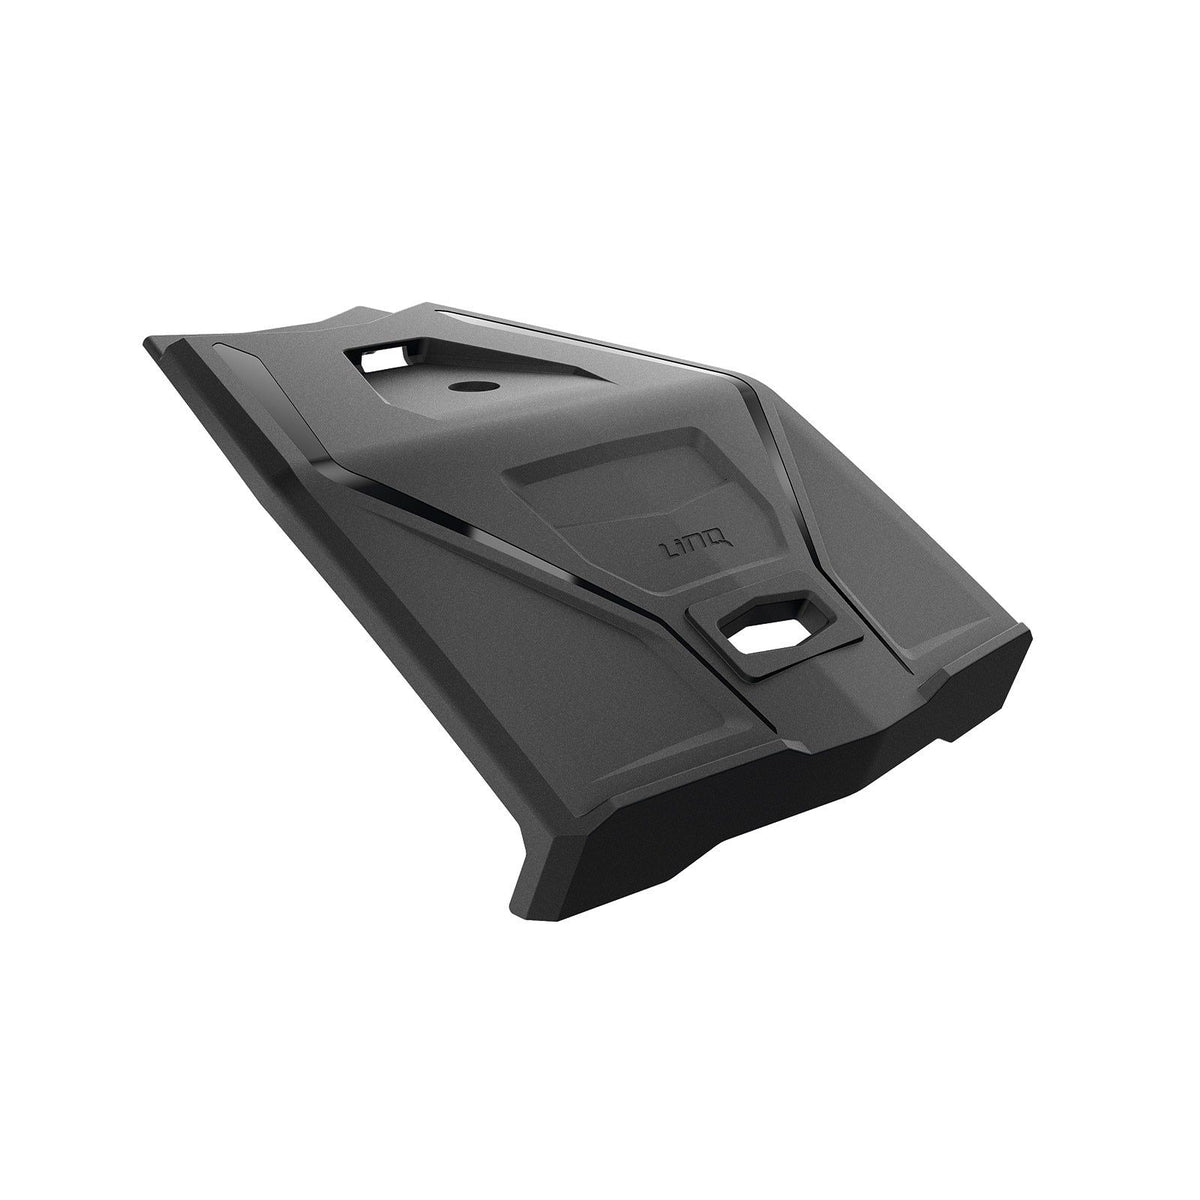 Ski-Doo Low Profile Battery Compartment Cover